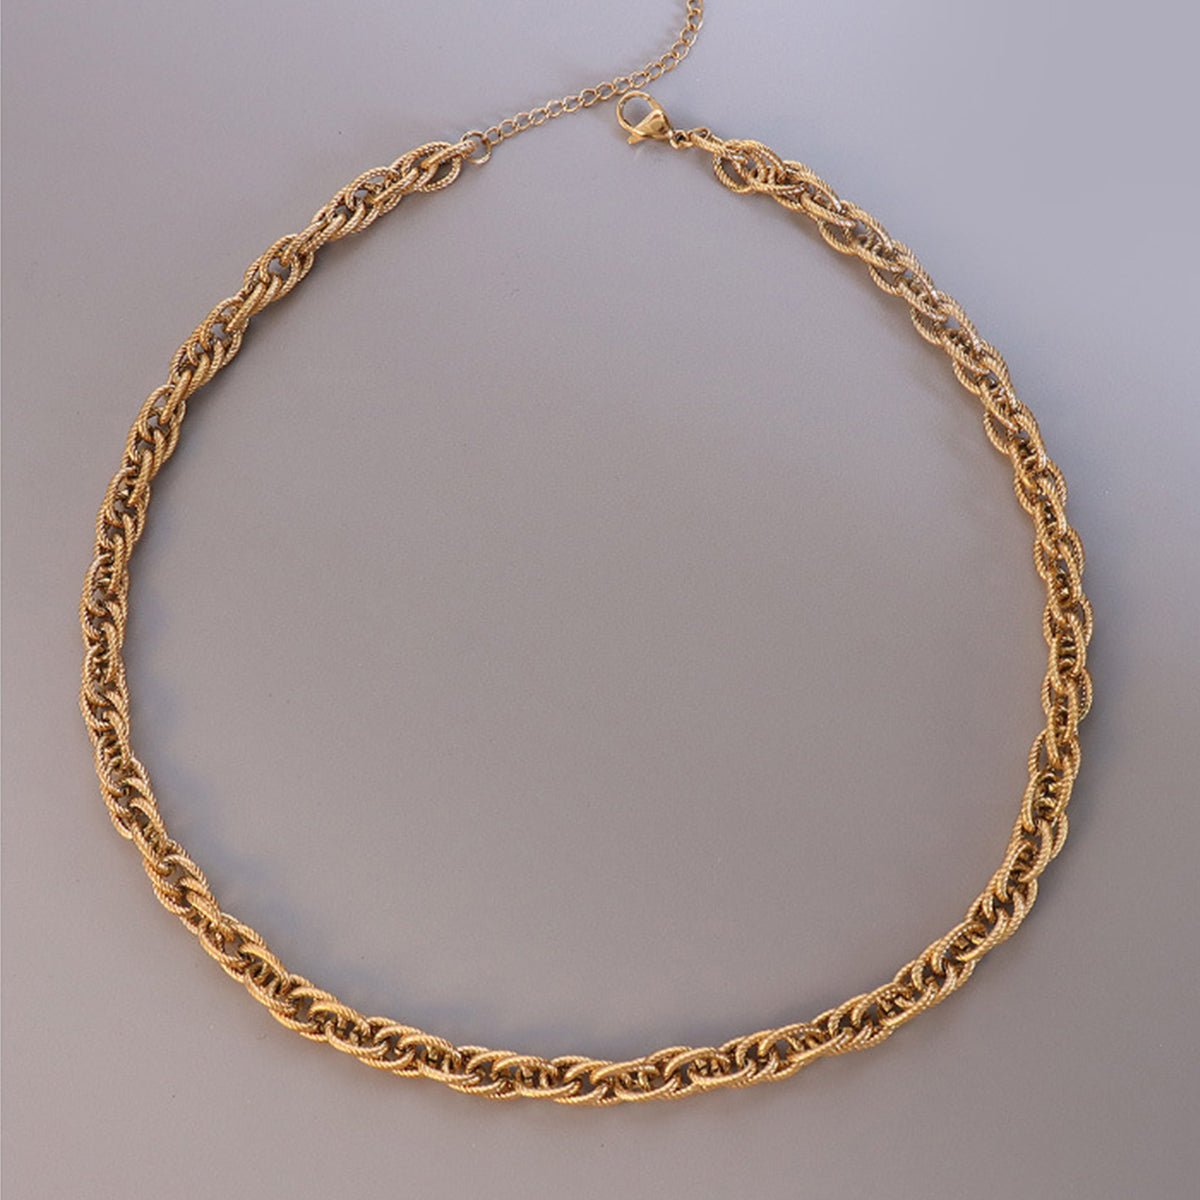 Chain Necklaces For Women 18k Gold Plated #Firefly Lane Boutique1